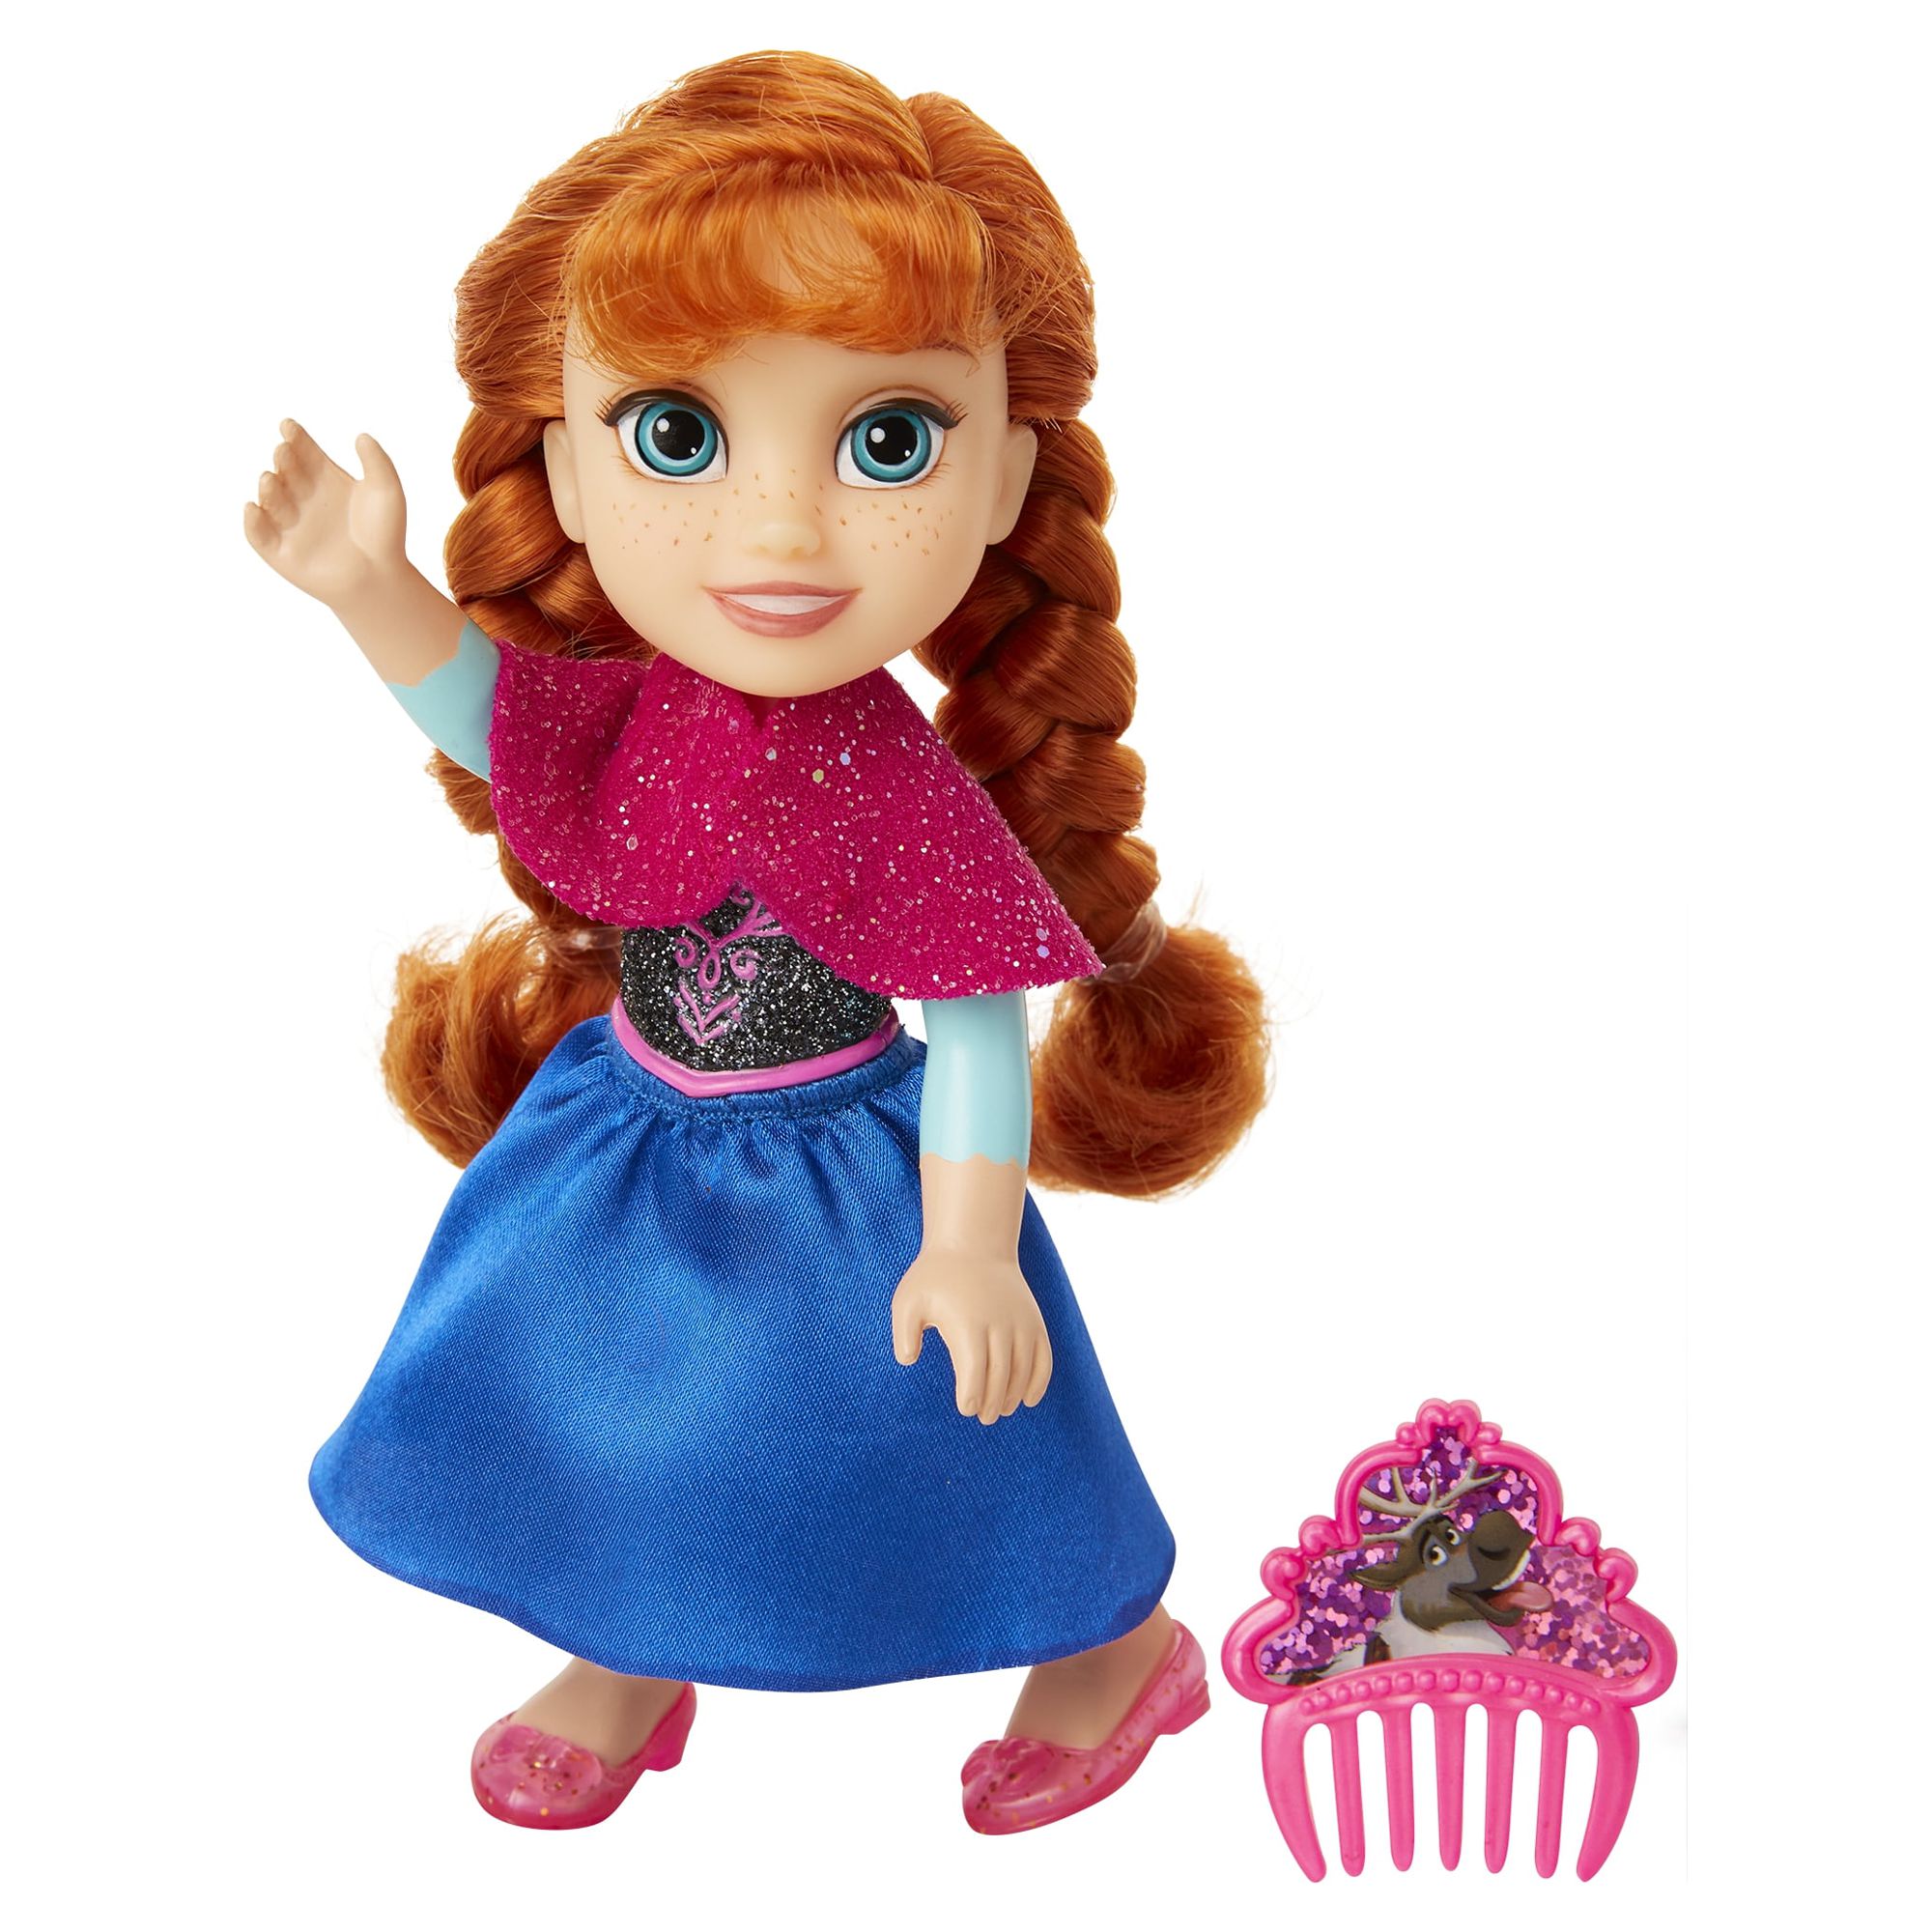 Disney Frozen Princess Anna 6" Petite Doll with Glittered Hard Bodice and Comb - image 2 of 6